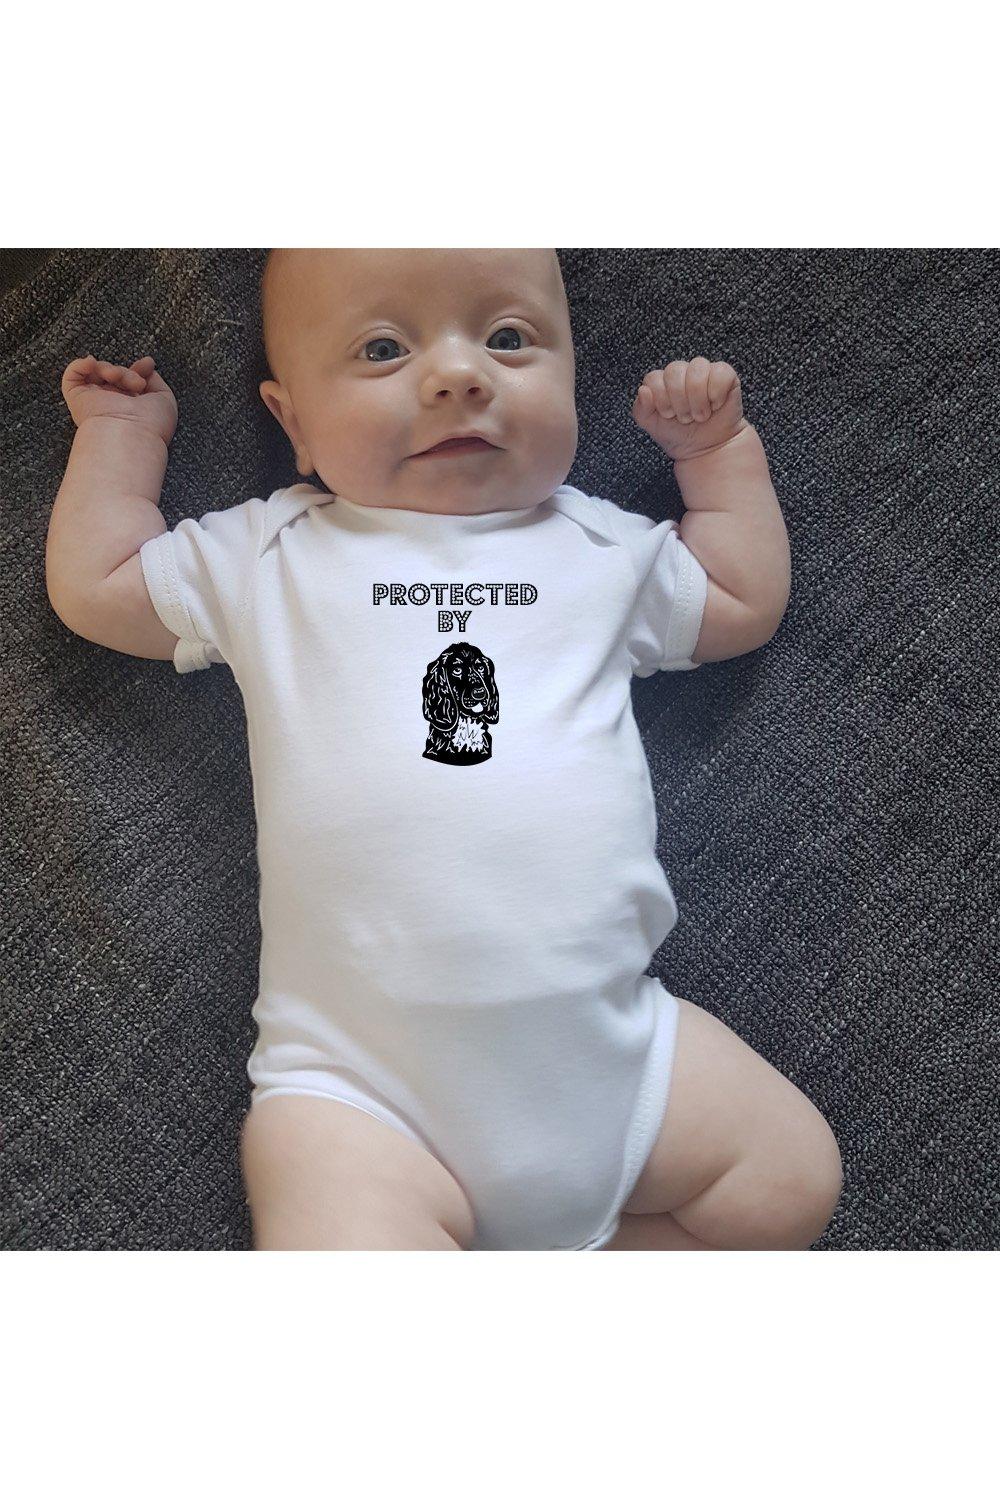 Protected by Cocker Spaniel Dog Baby bodysuit / Baby Grow